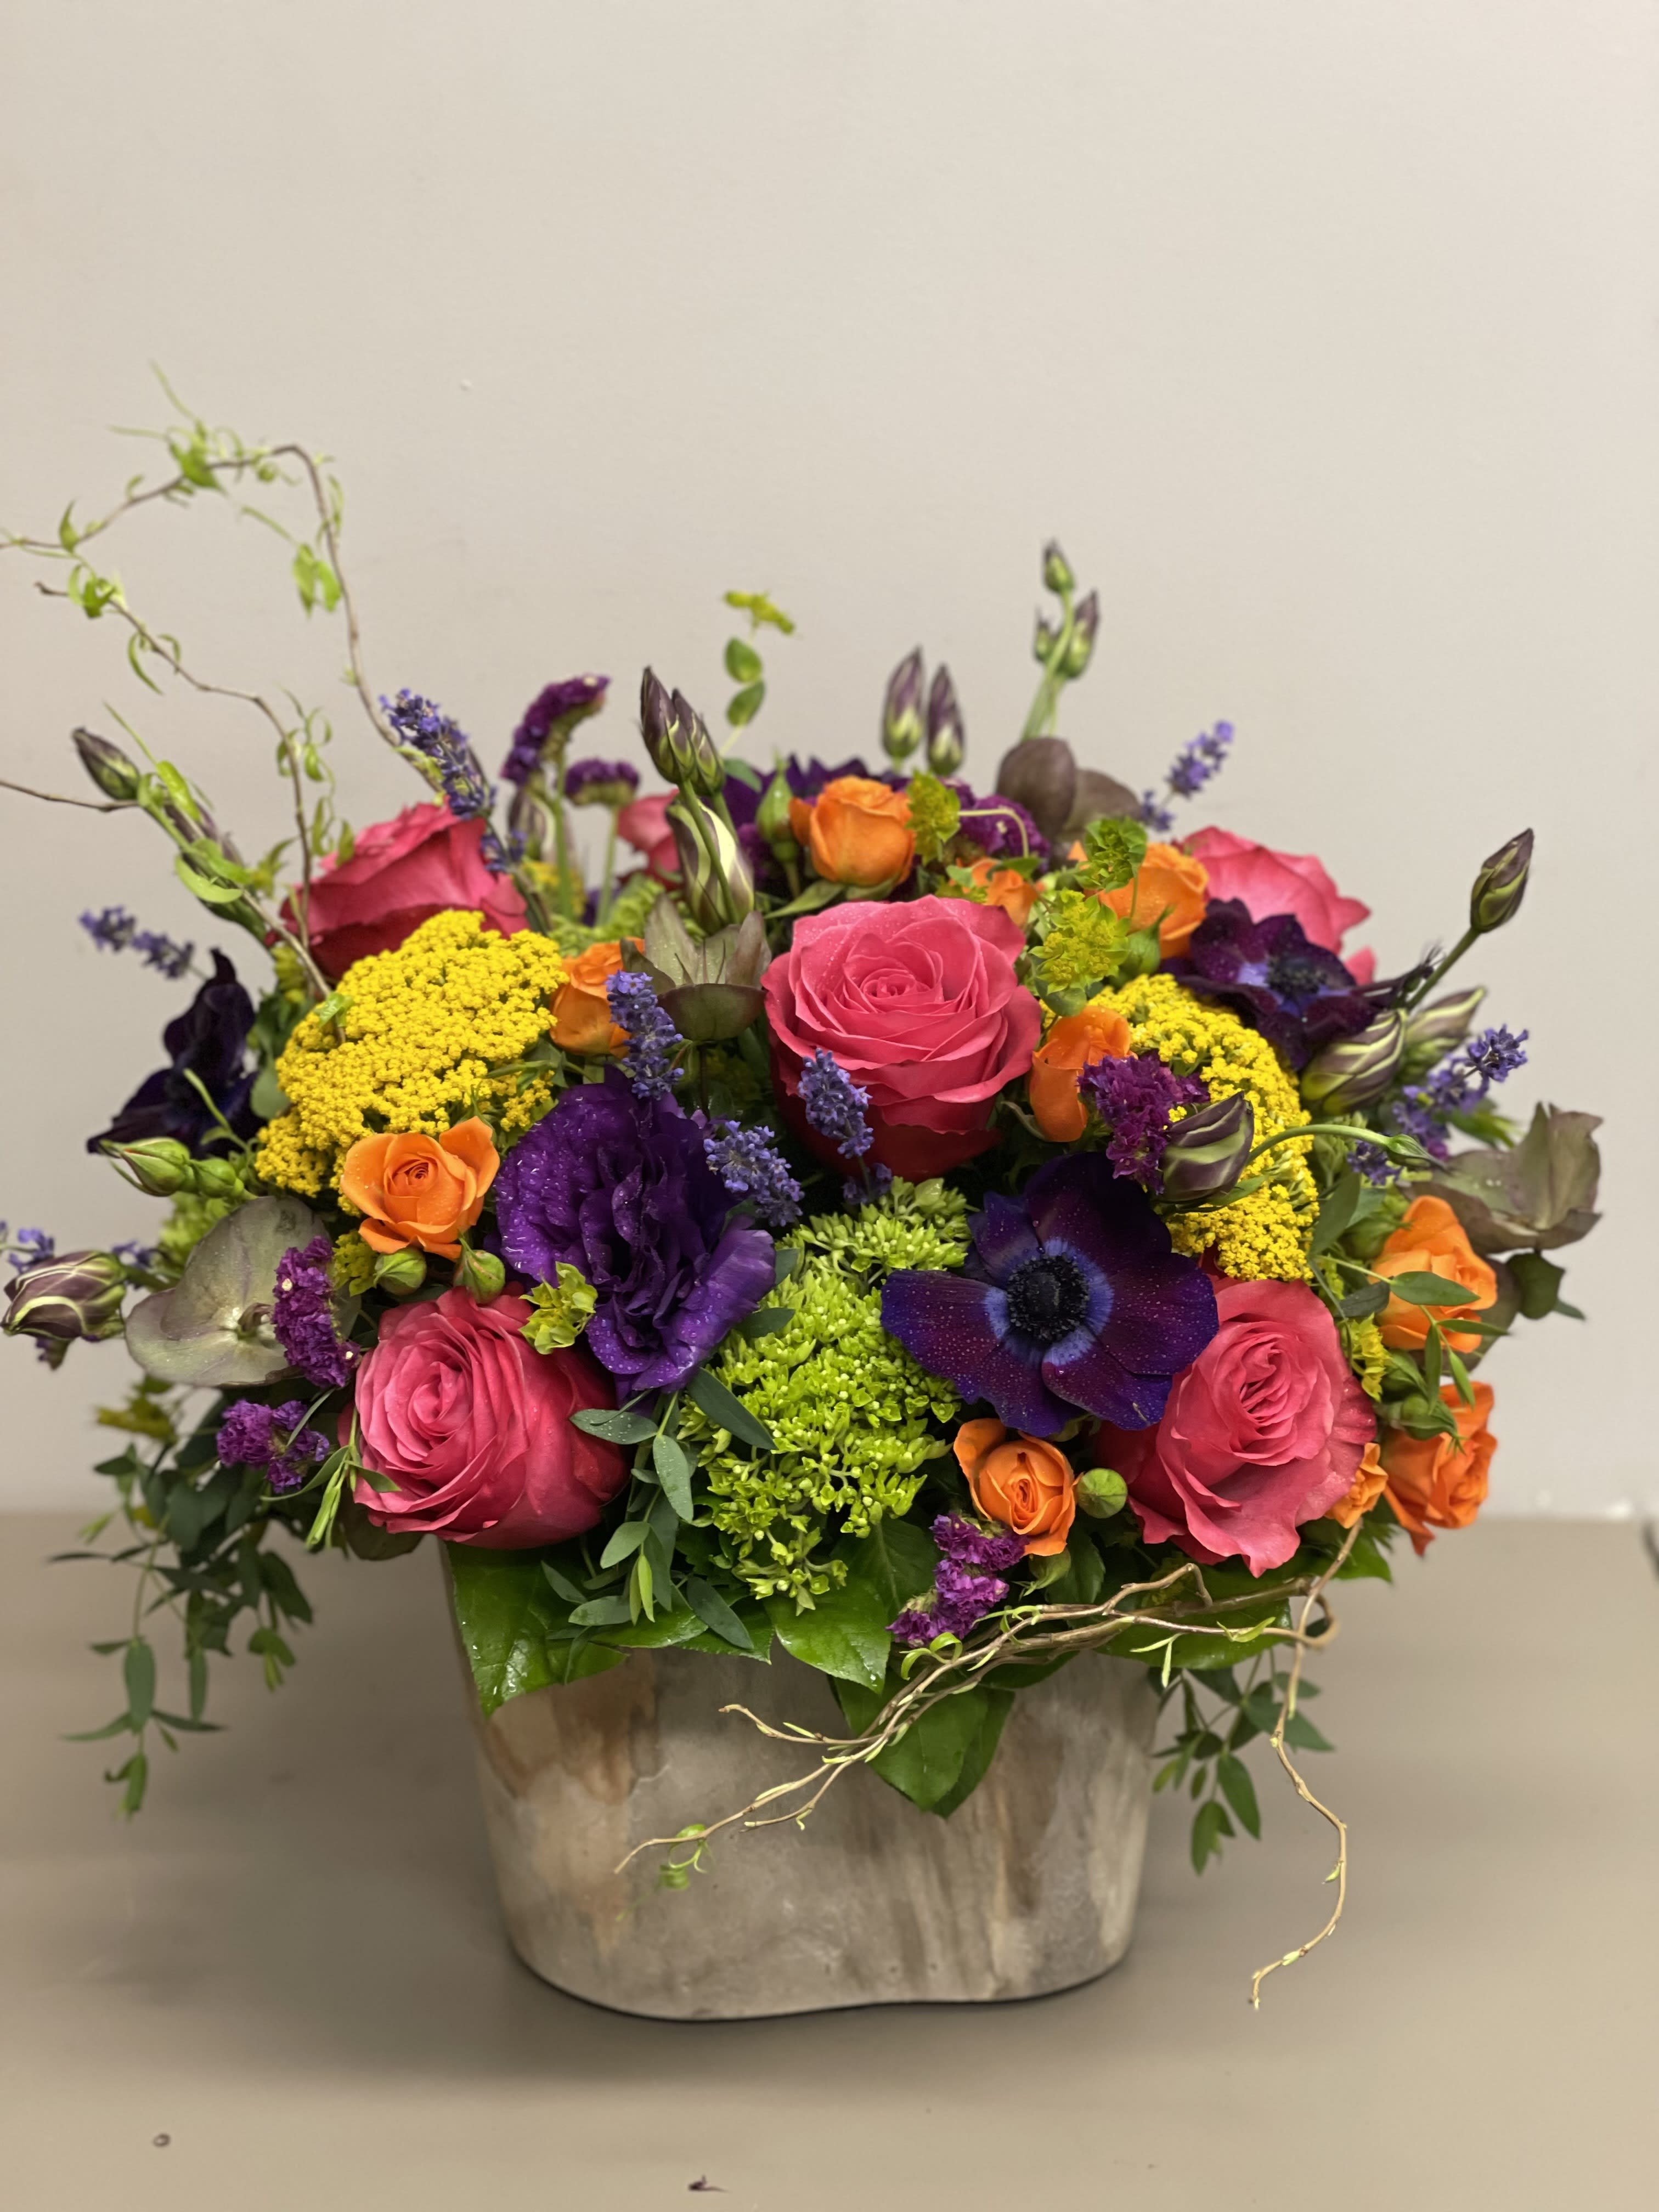 Brilliance - Stunning flower arrangement with Roses, Hydrangeas, Lisianthus , anemone and other seasonal flowers in bright jewel tones in a wooden rustic container.  